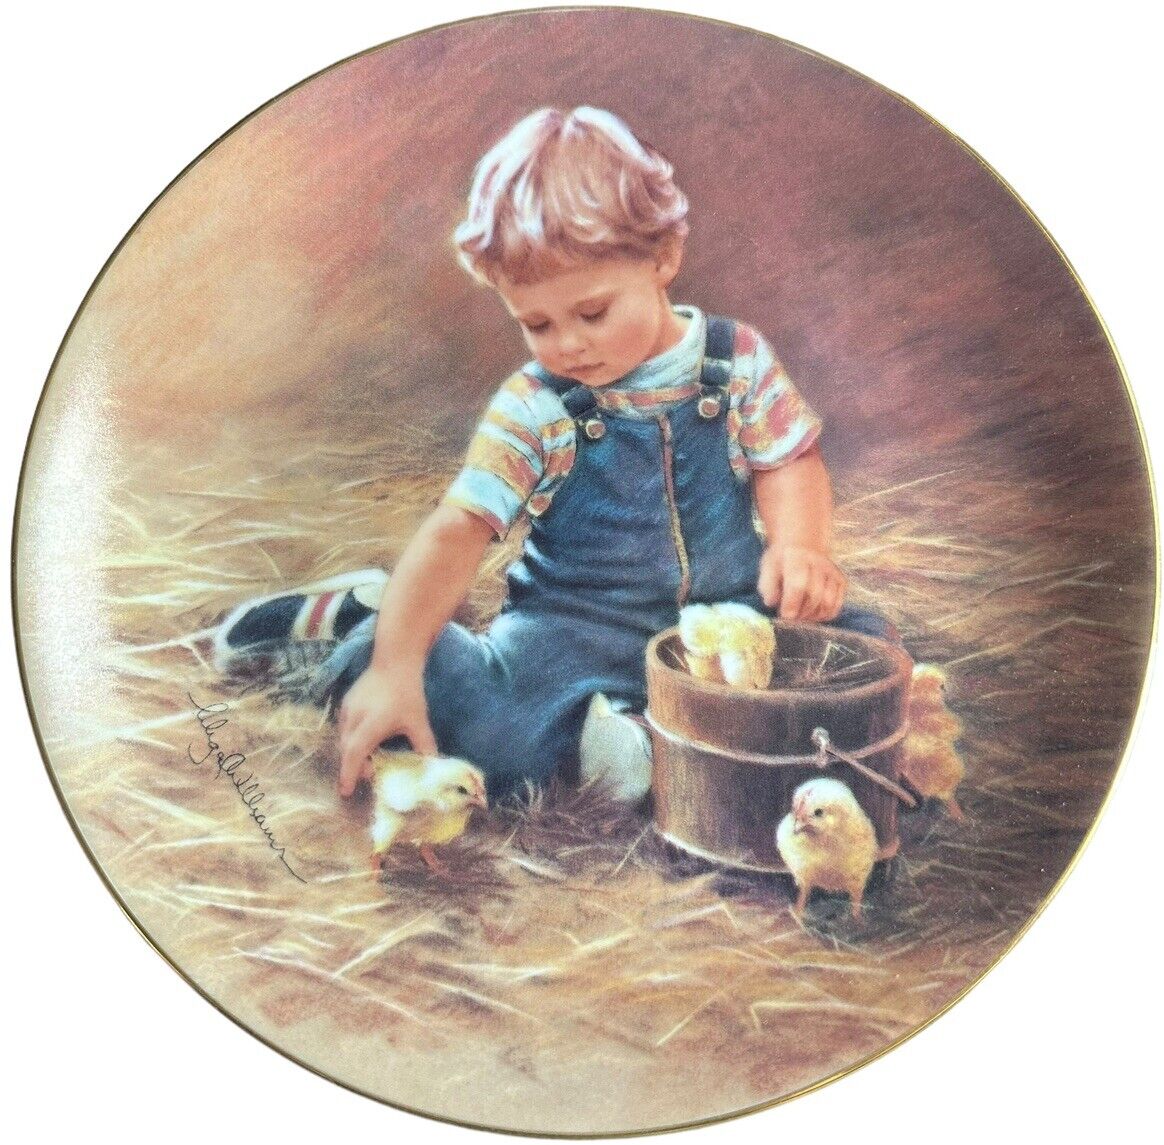 1984 The Hamilton Collection The Magic Of Childhood “Special Friends” 9” Plate.